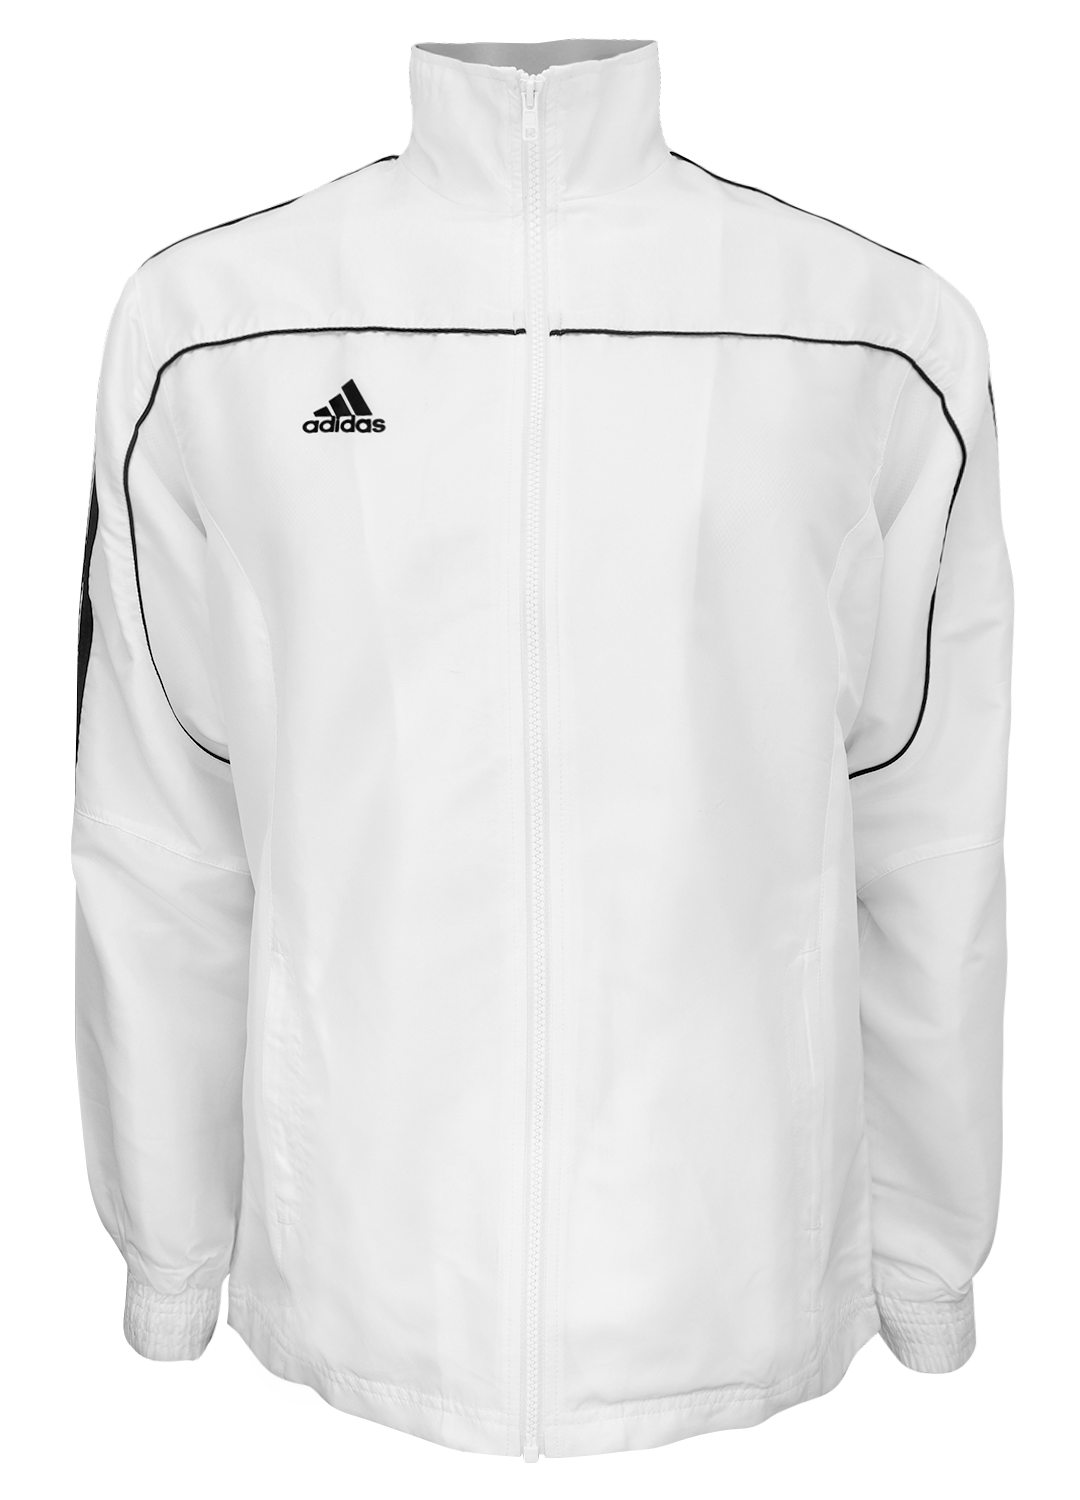 OFFICIAL USAT GRAND PRIX CENTRAL ADIDAS TEAM JACKET-WHITE